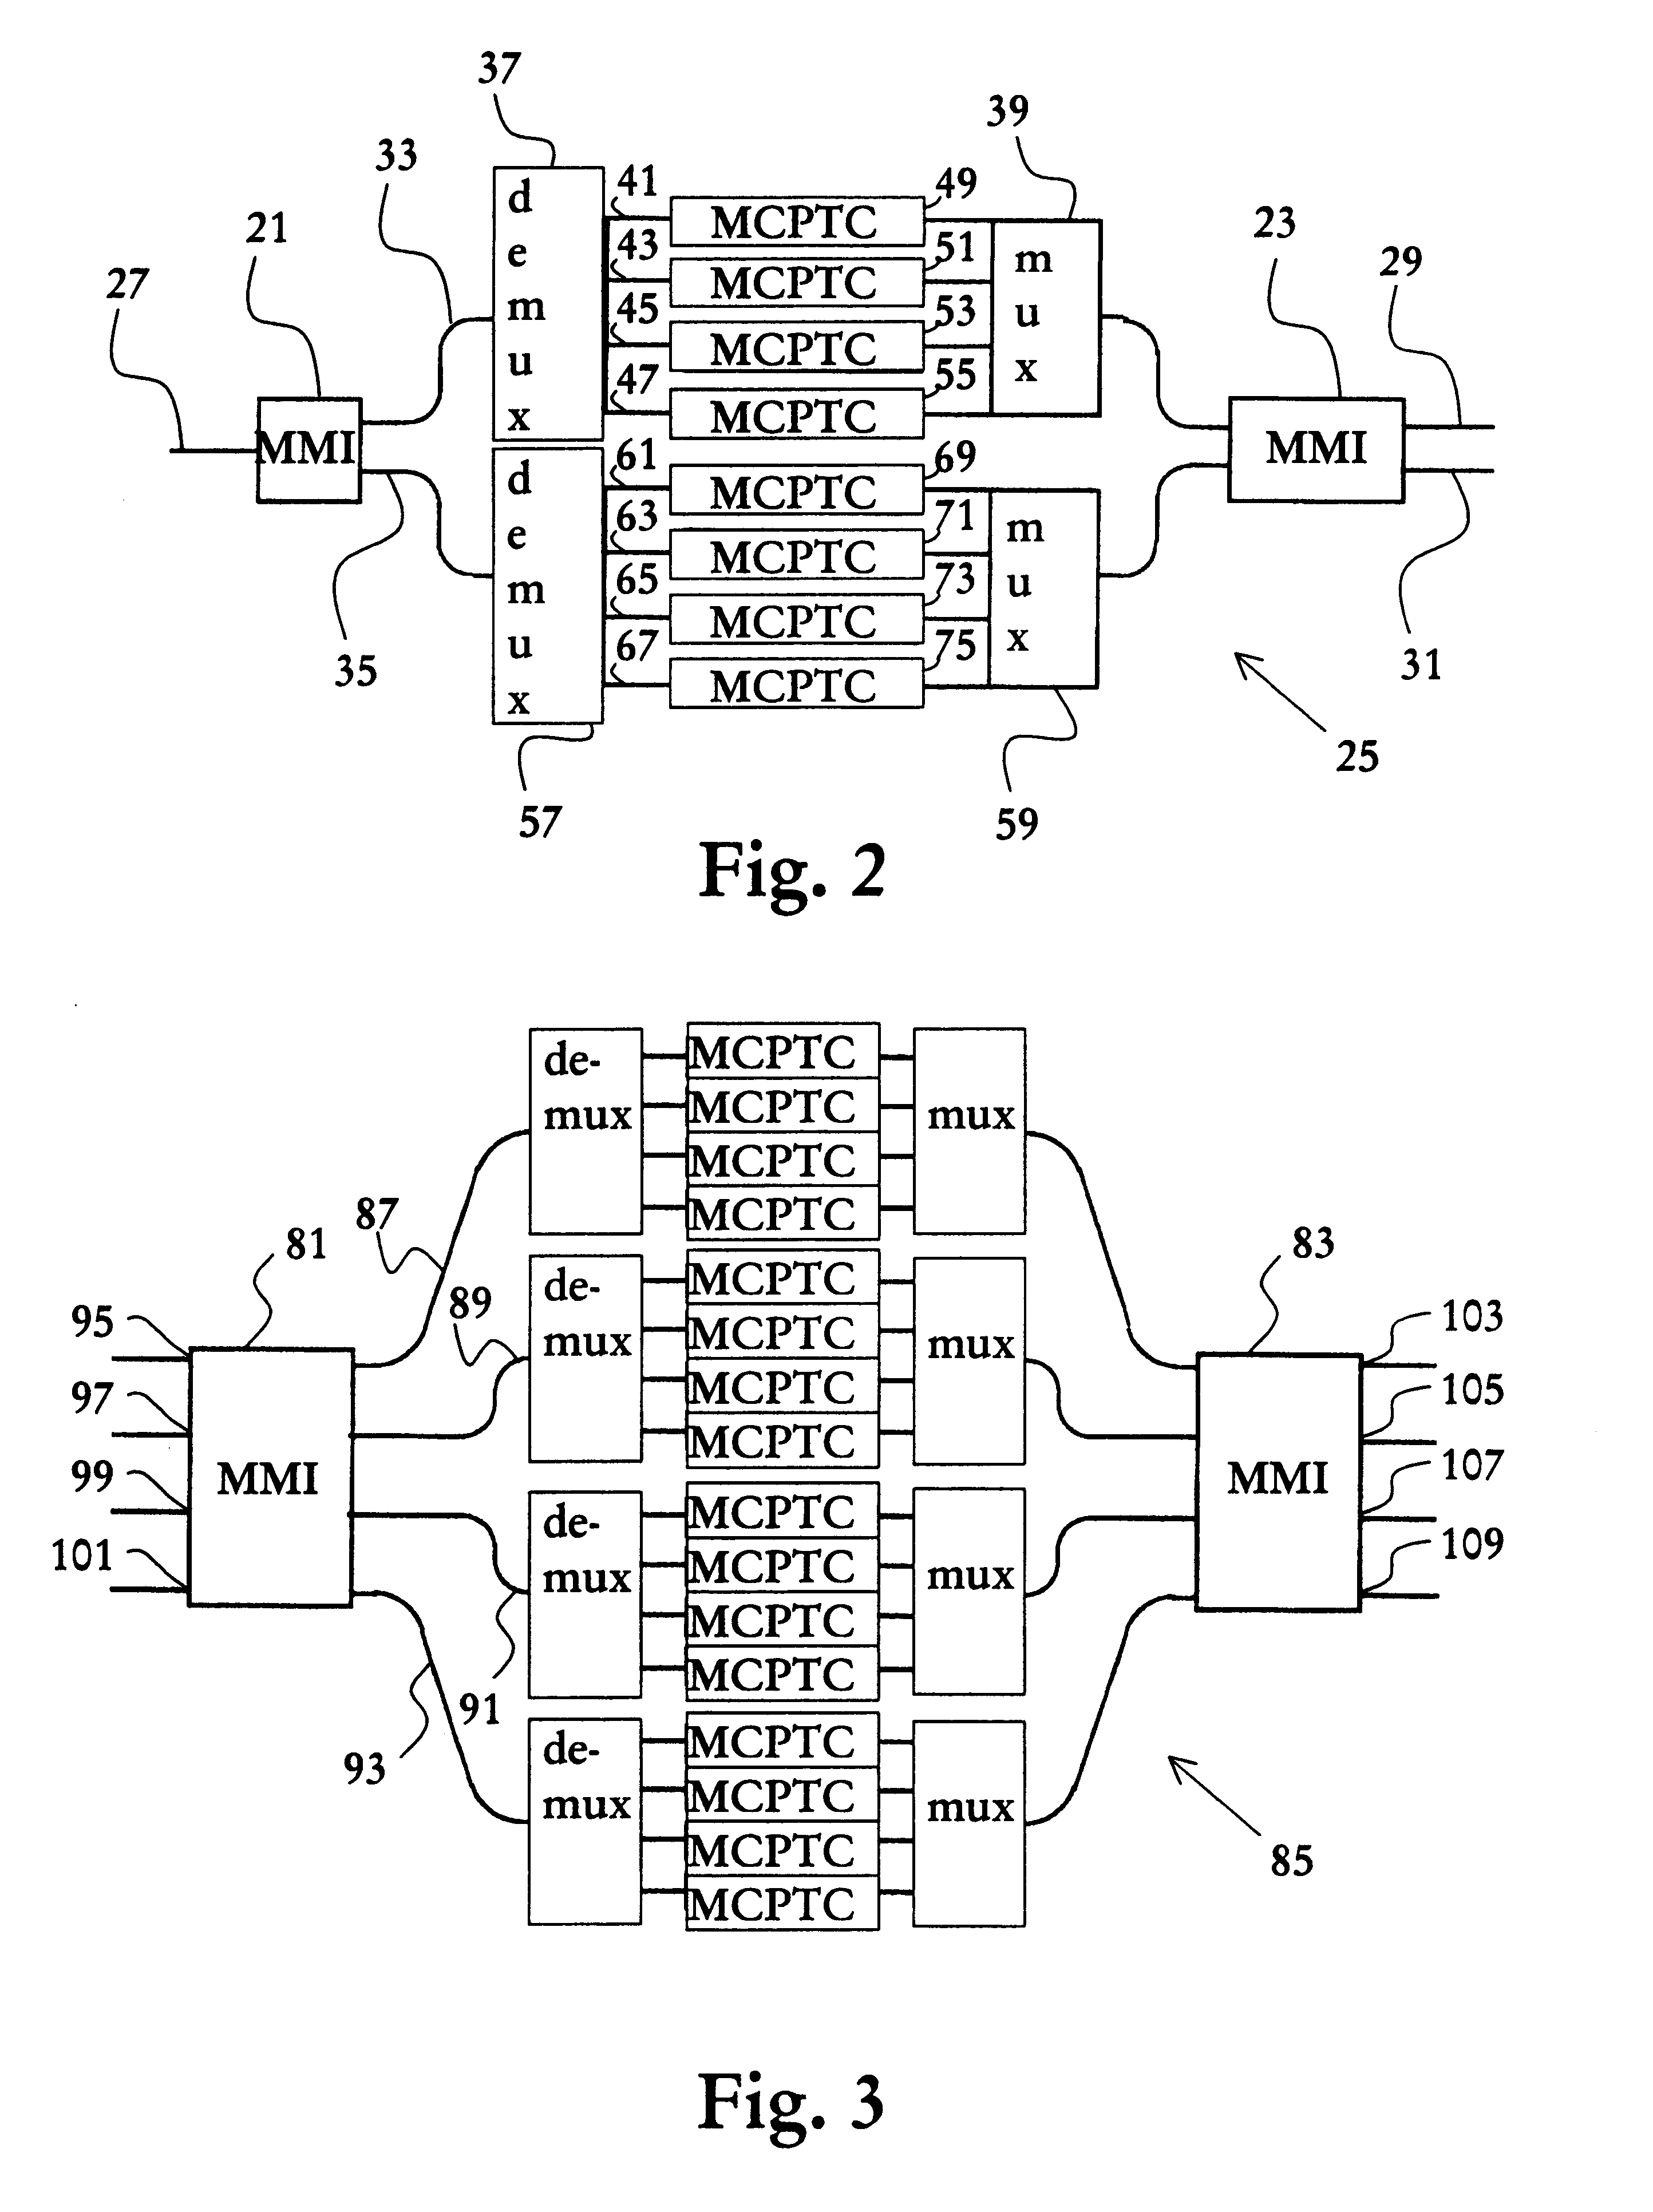 Apparatus and method for wavelength selective switching